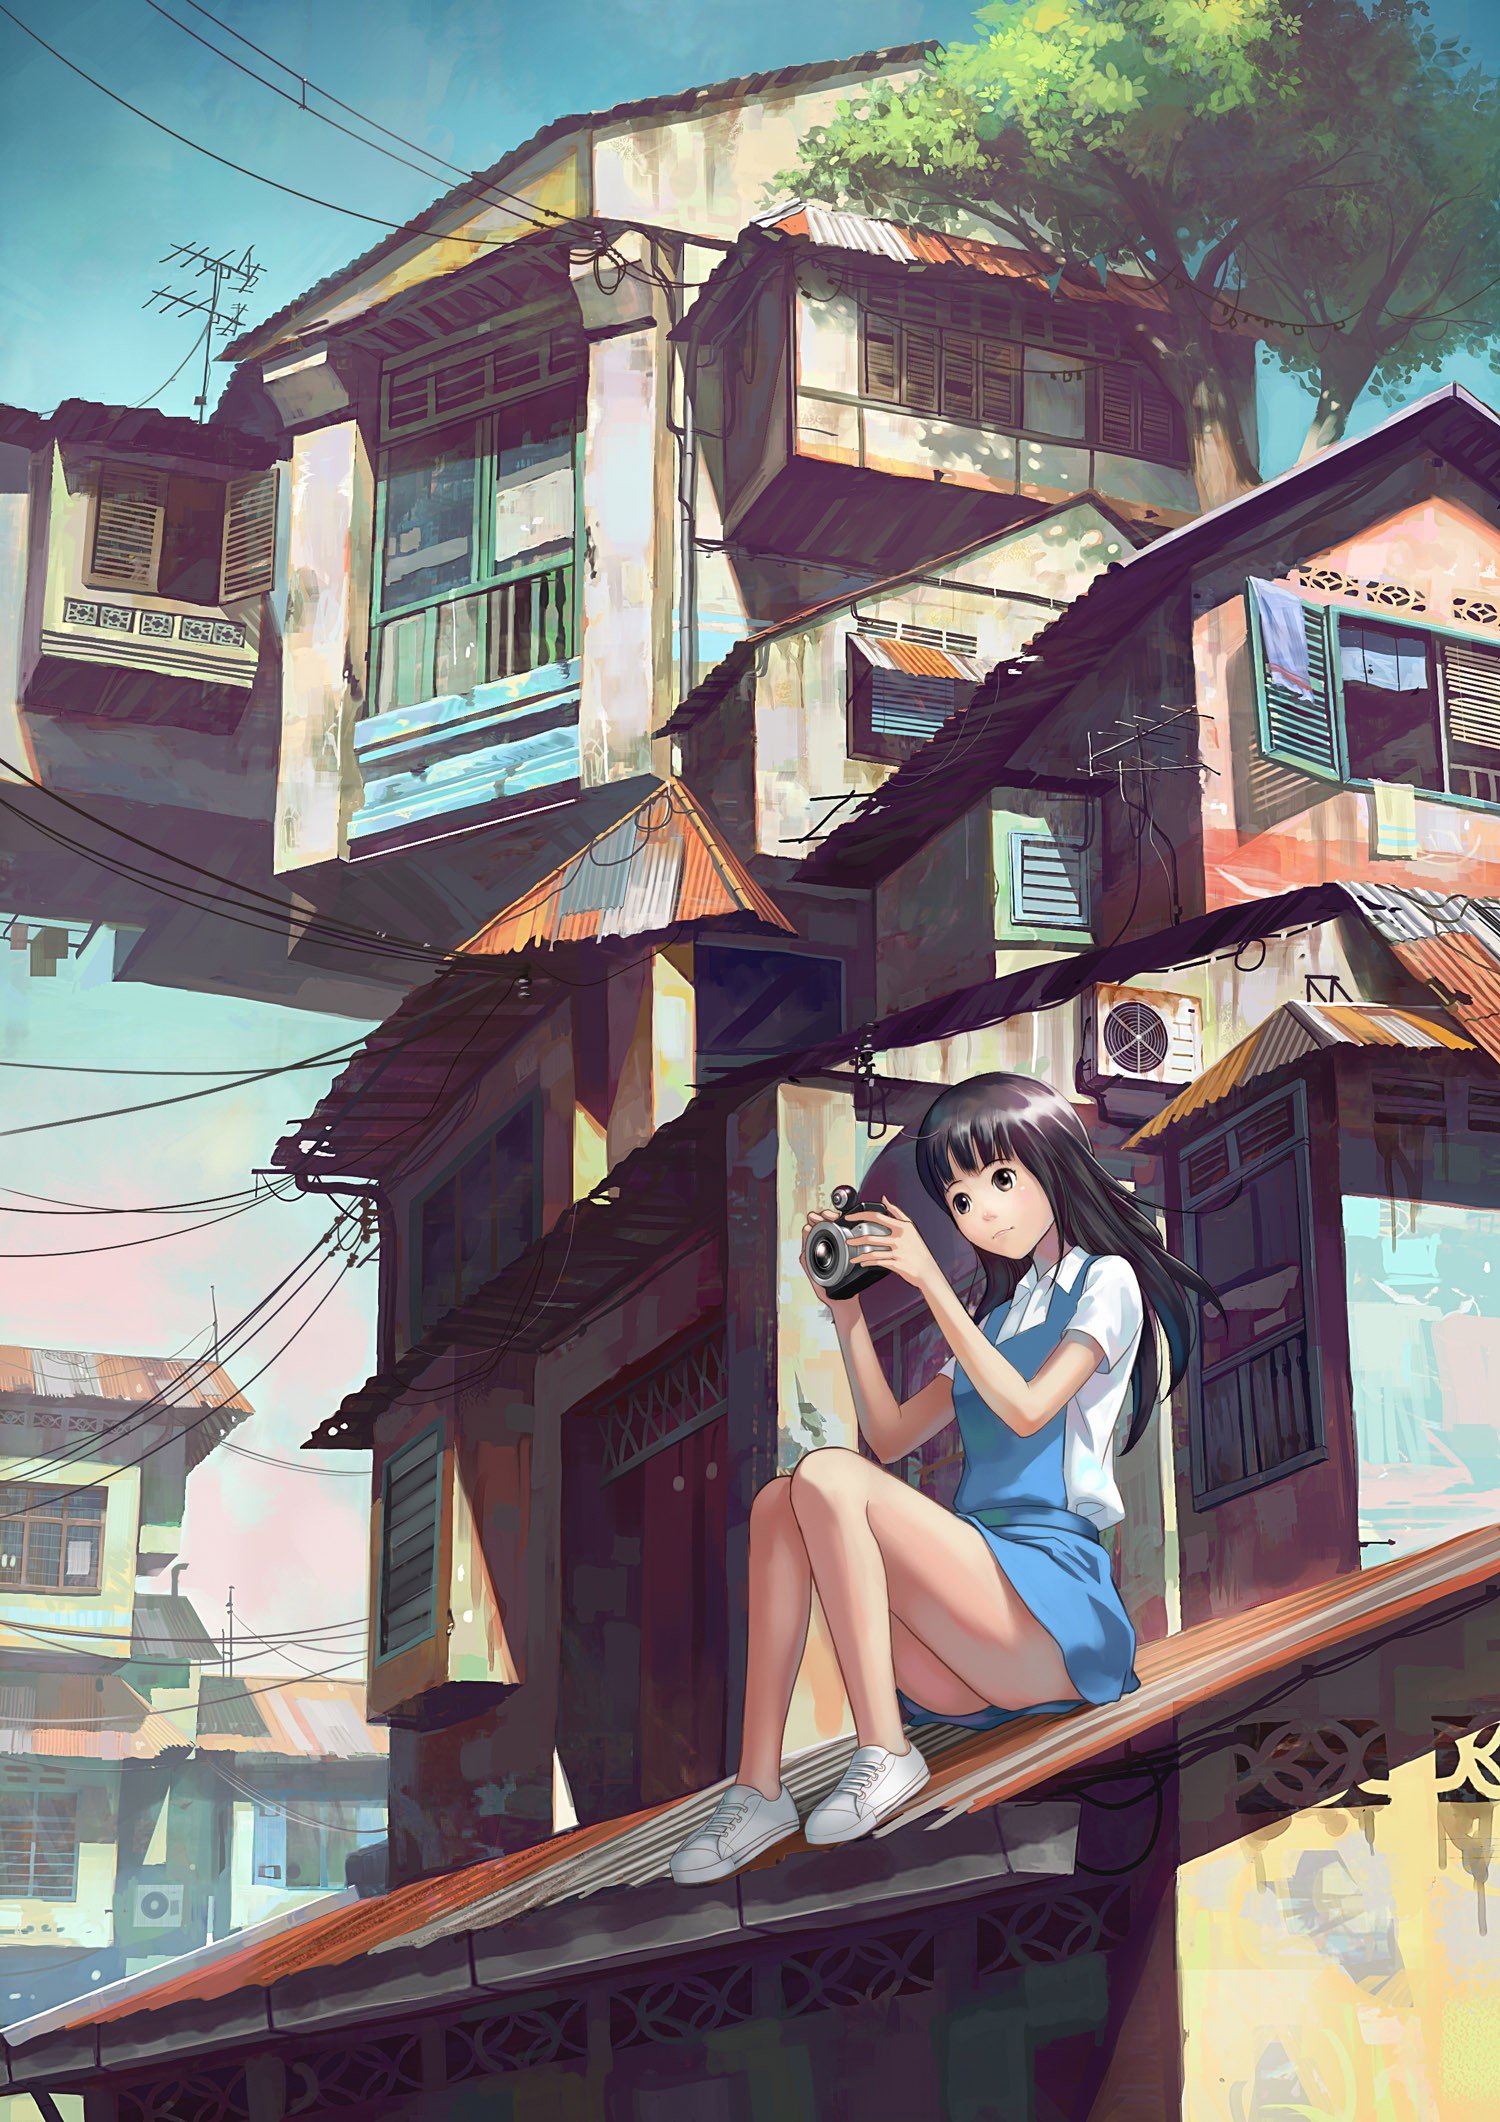 paintings, Landscapes, Cityscapes, Cameras, Digital, Art, Artwork, Drawings, Anime, Girls Wallpaper